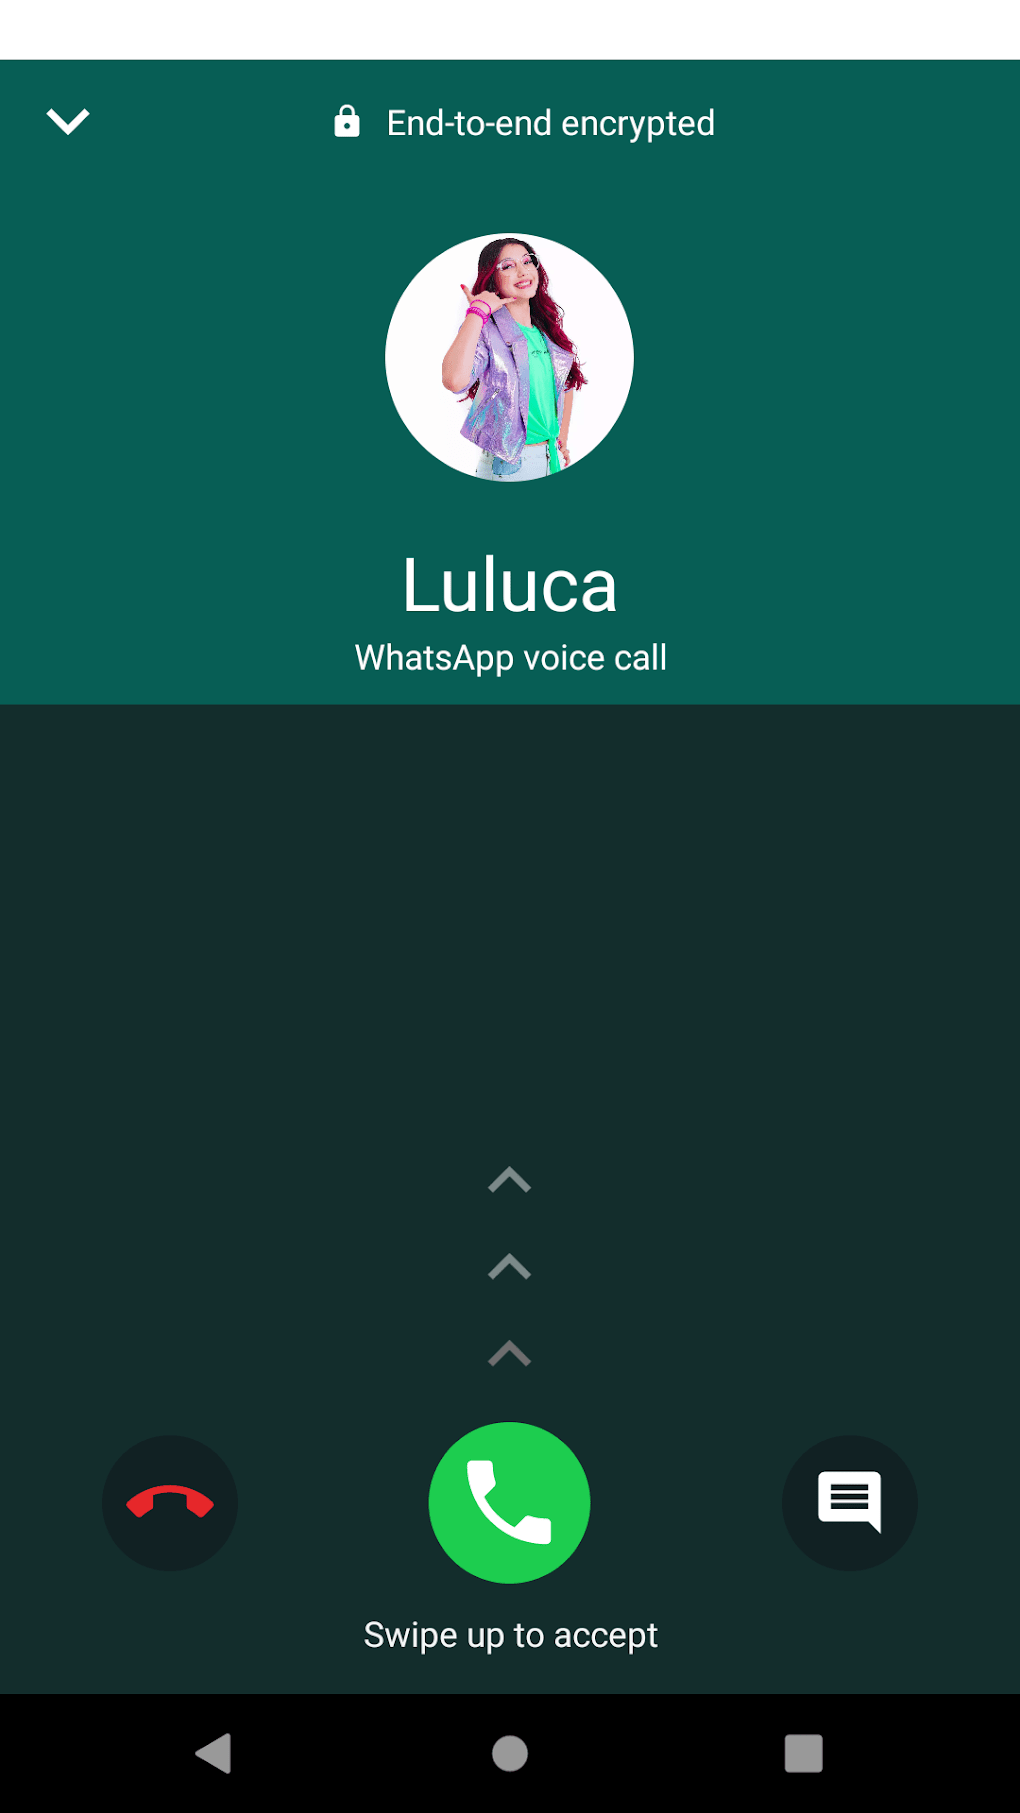 Luluca Calling Me - Fake Video – Apps on Google Play